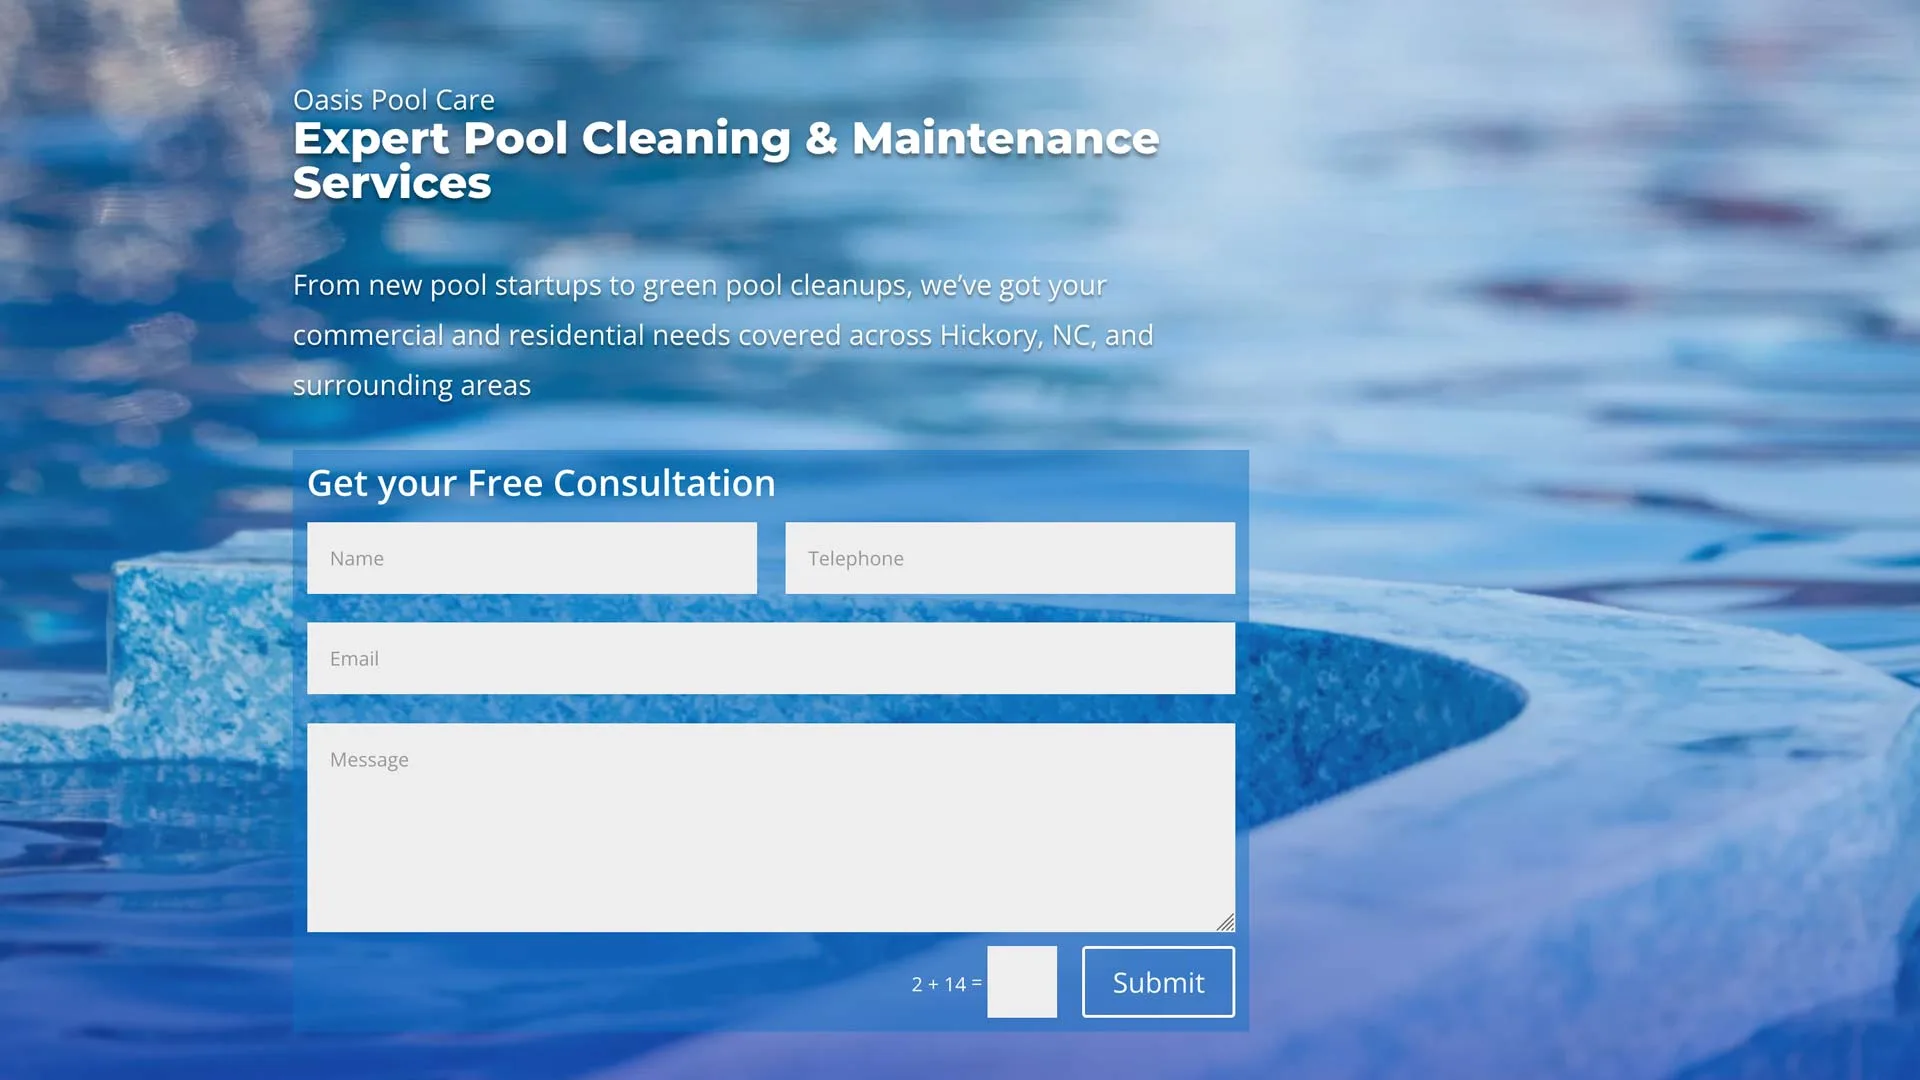 Oasis Pool Care NC website designed by Hickory NC web design service.